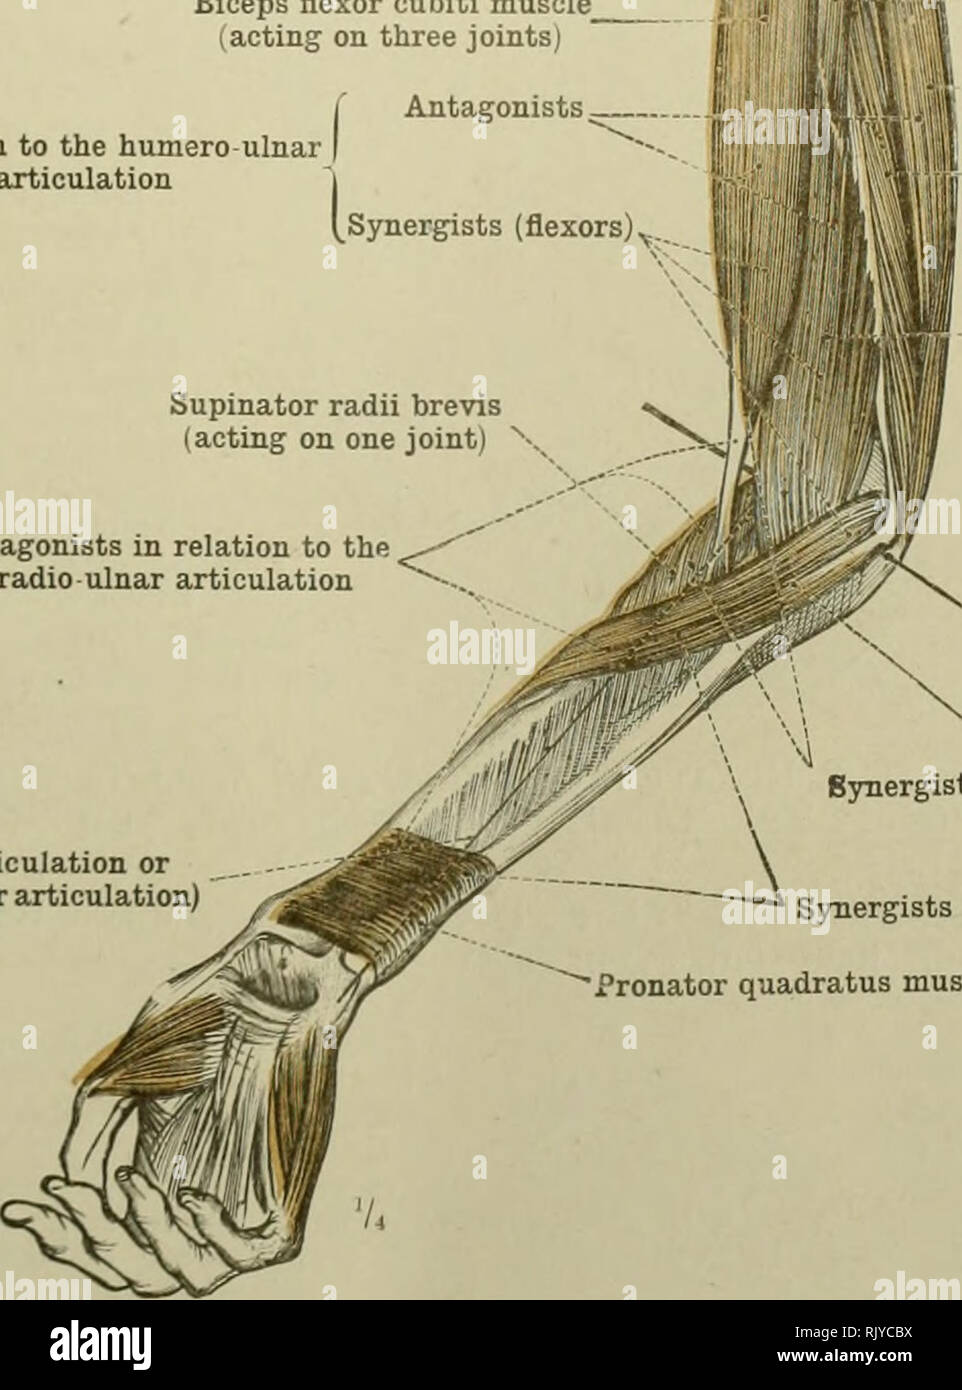 An atlas of human anatomy for students and physicians. Anatomy. In relation  to the humero ulnar articulation Antagonists- Synergists (flexors)v.  Supinator radii brevis (acting on one joint) &quot; radio ulnar articulation